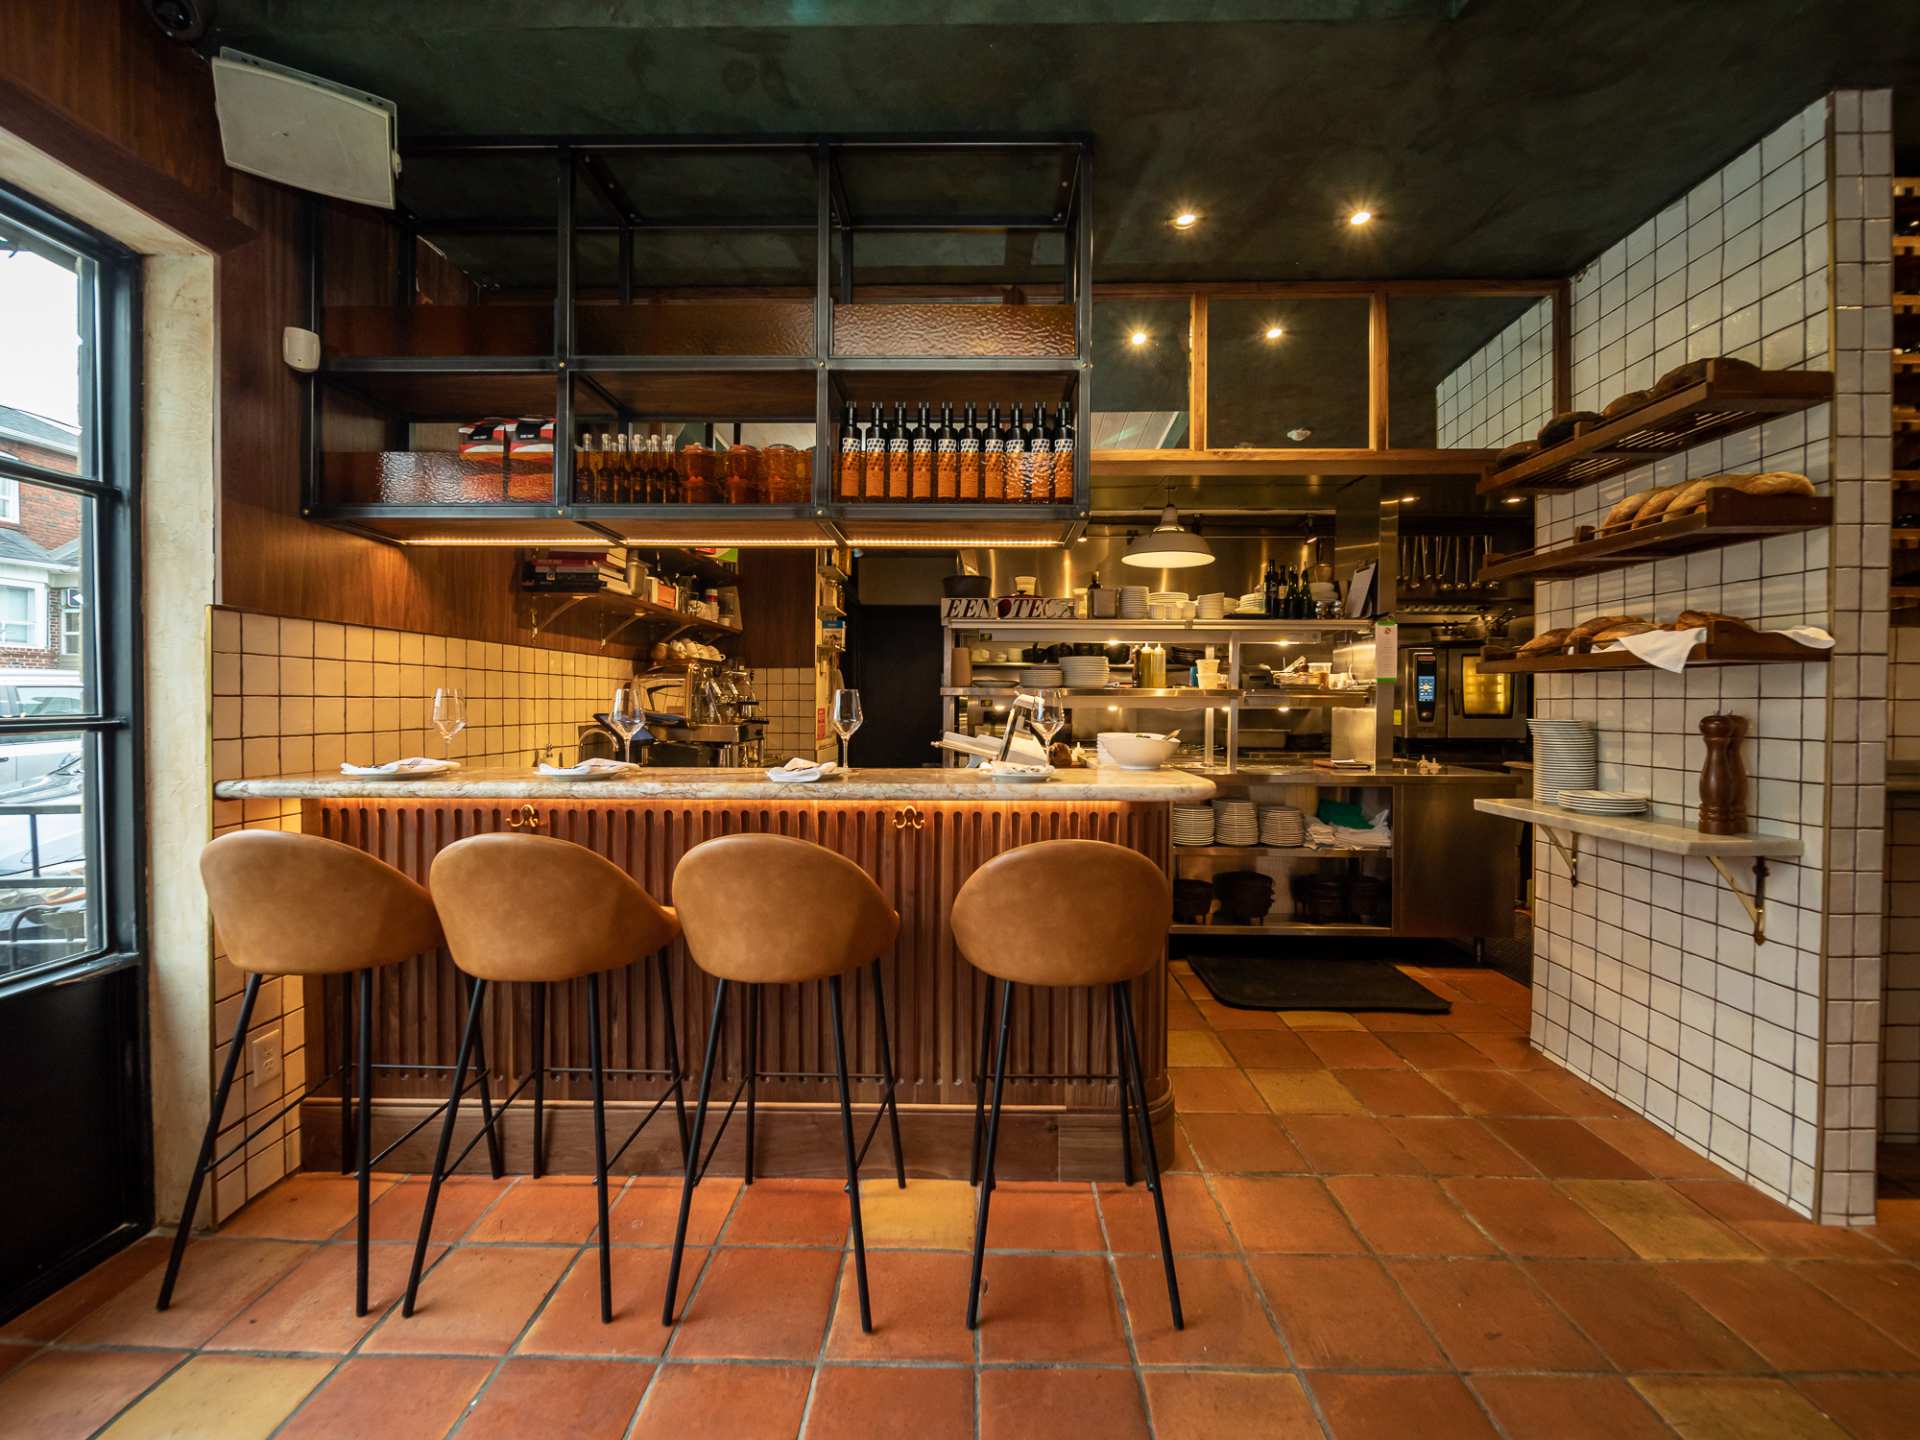 Best Michelin restaurants | The bar with stools and shelves at Enoteca Sociale